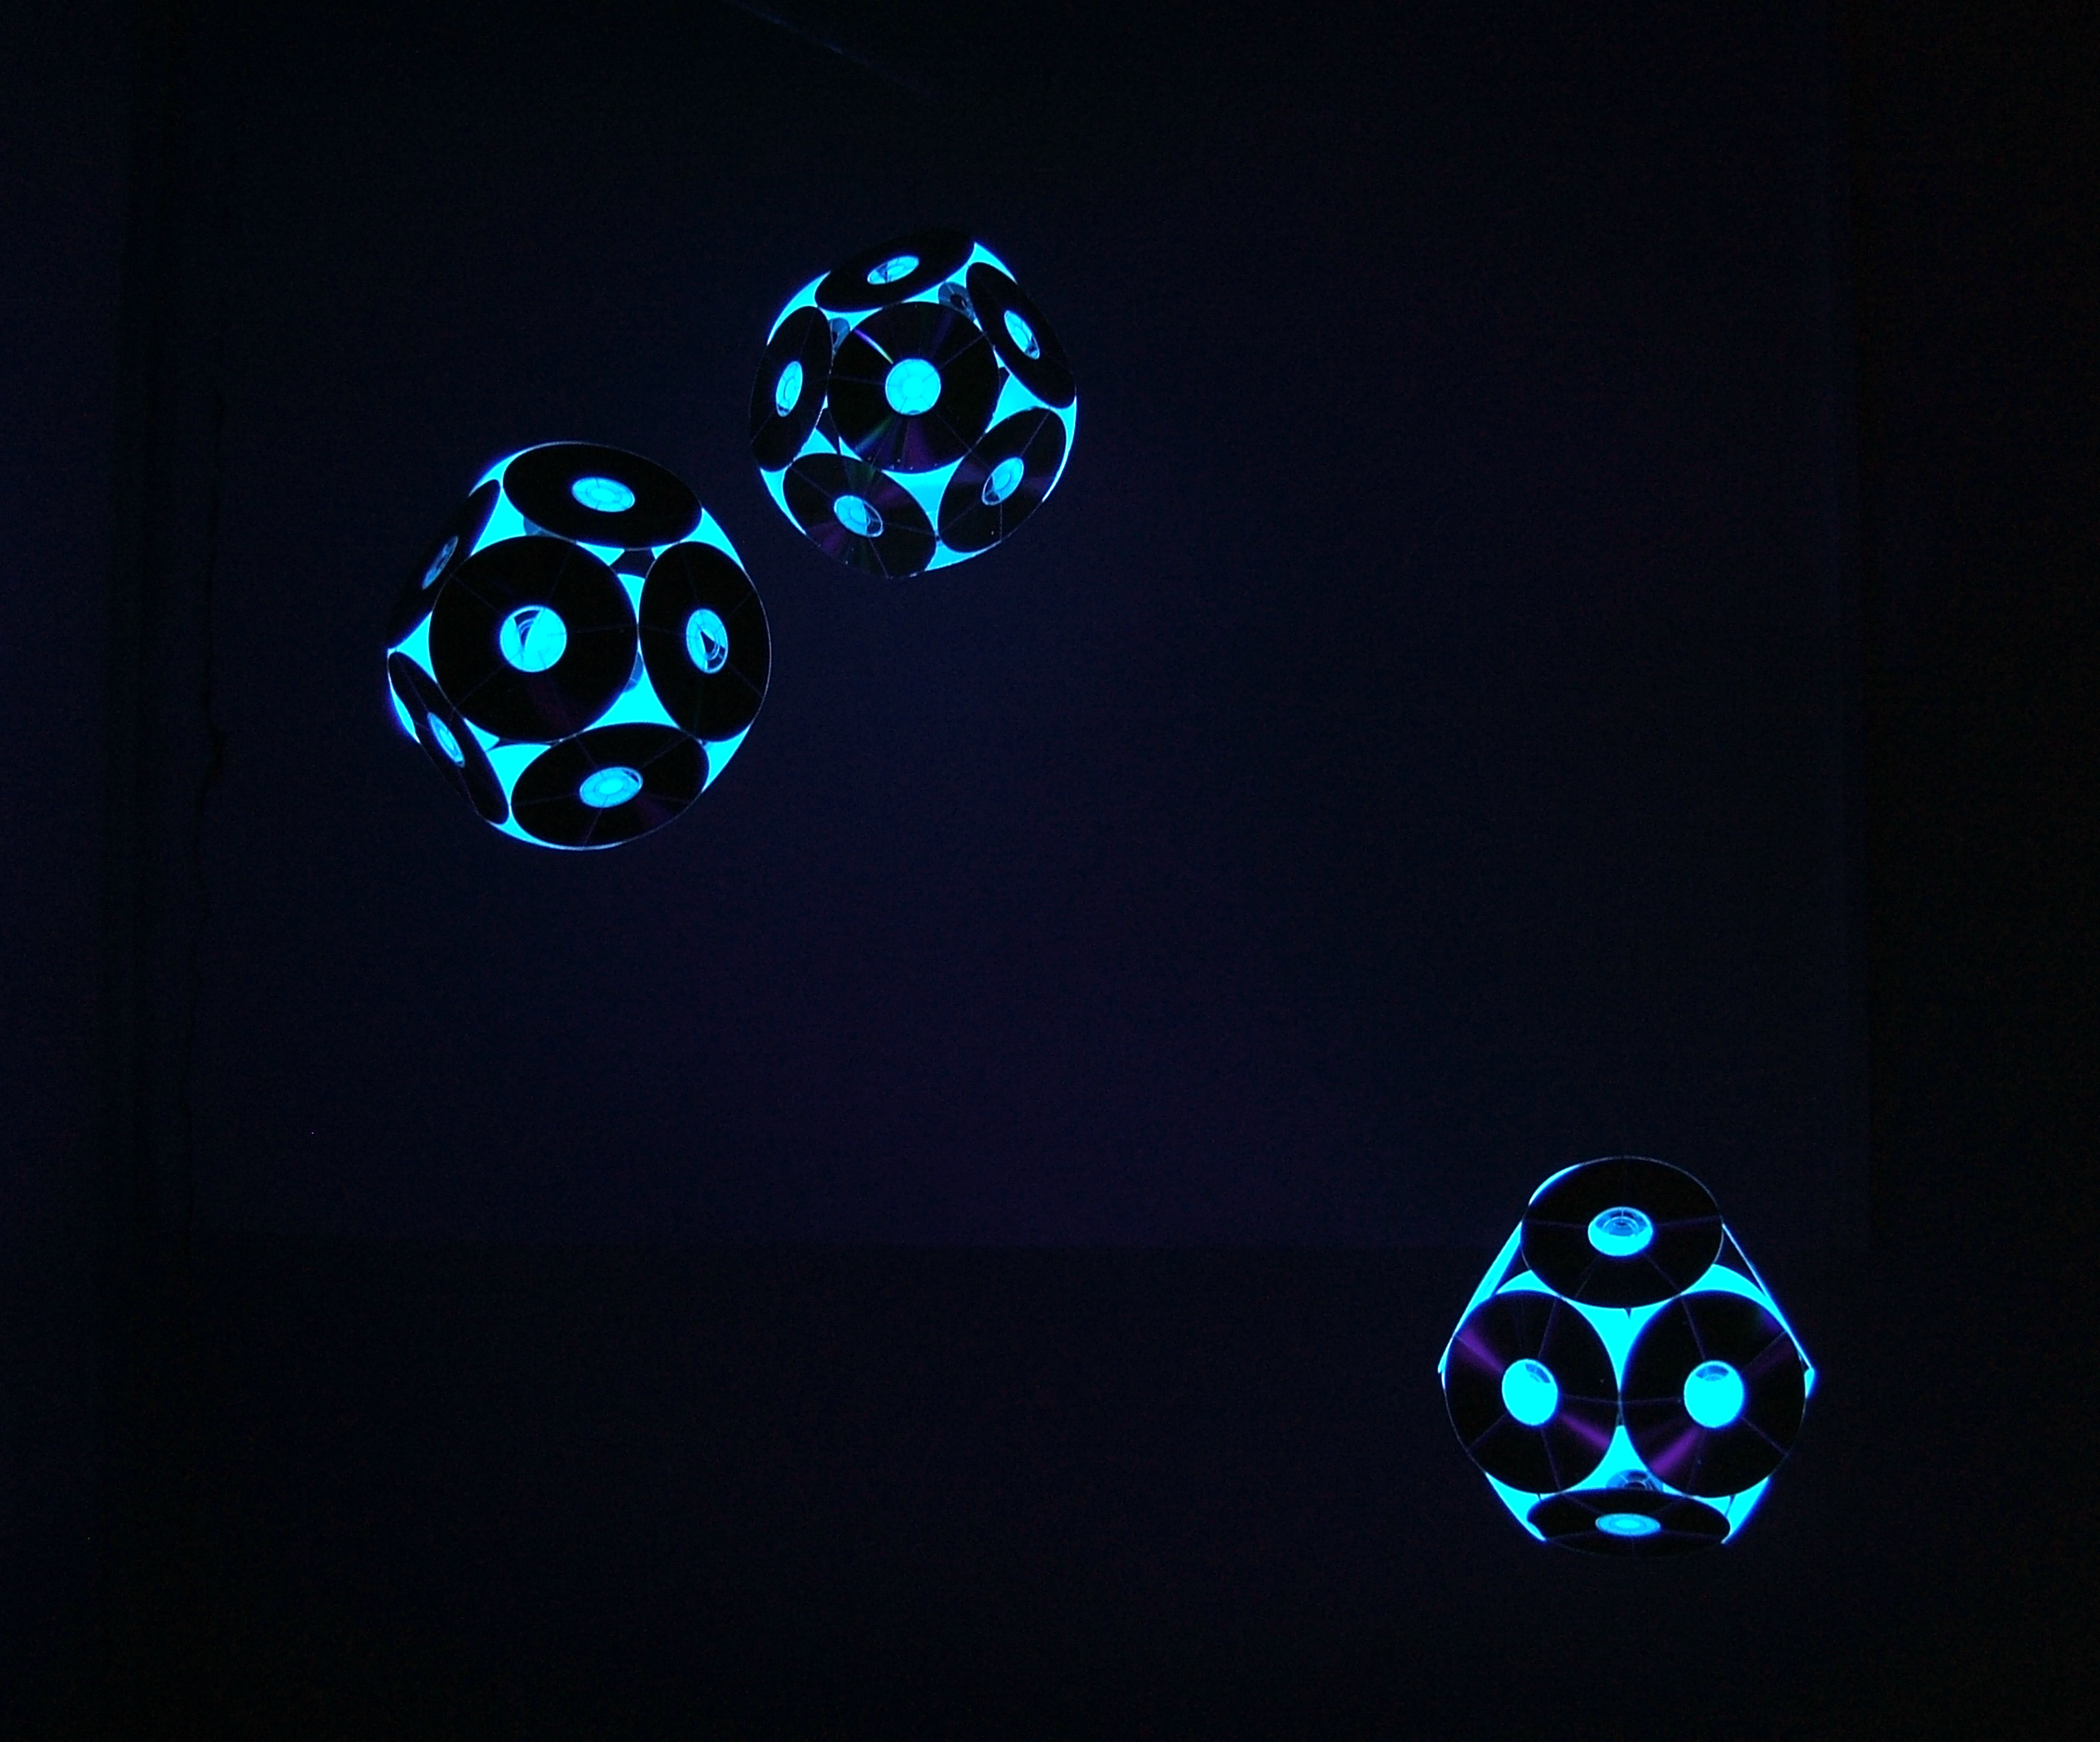 Joanna Thede's art work Demodulator featuring 3 spheres of seemingly glowing cold blue colour.